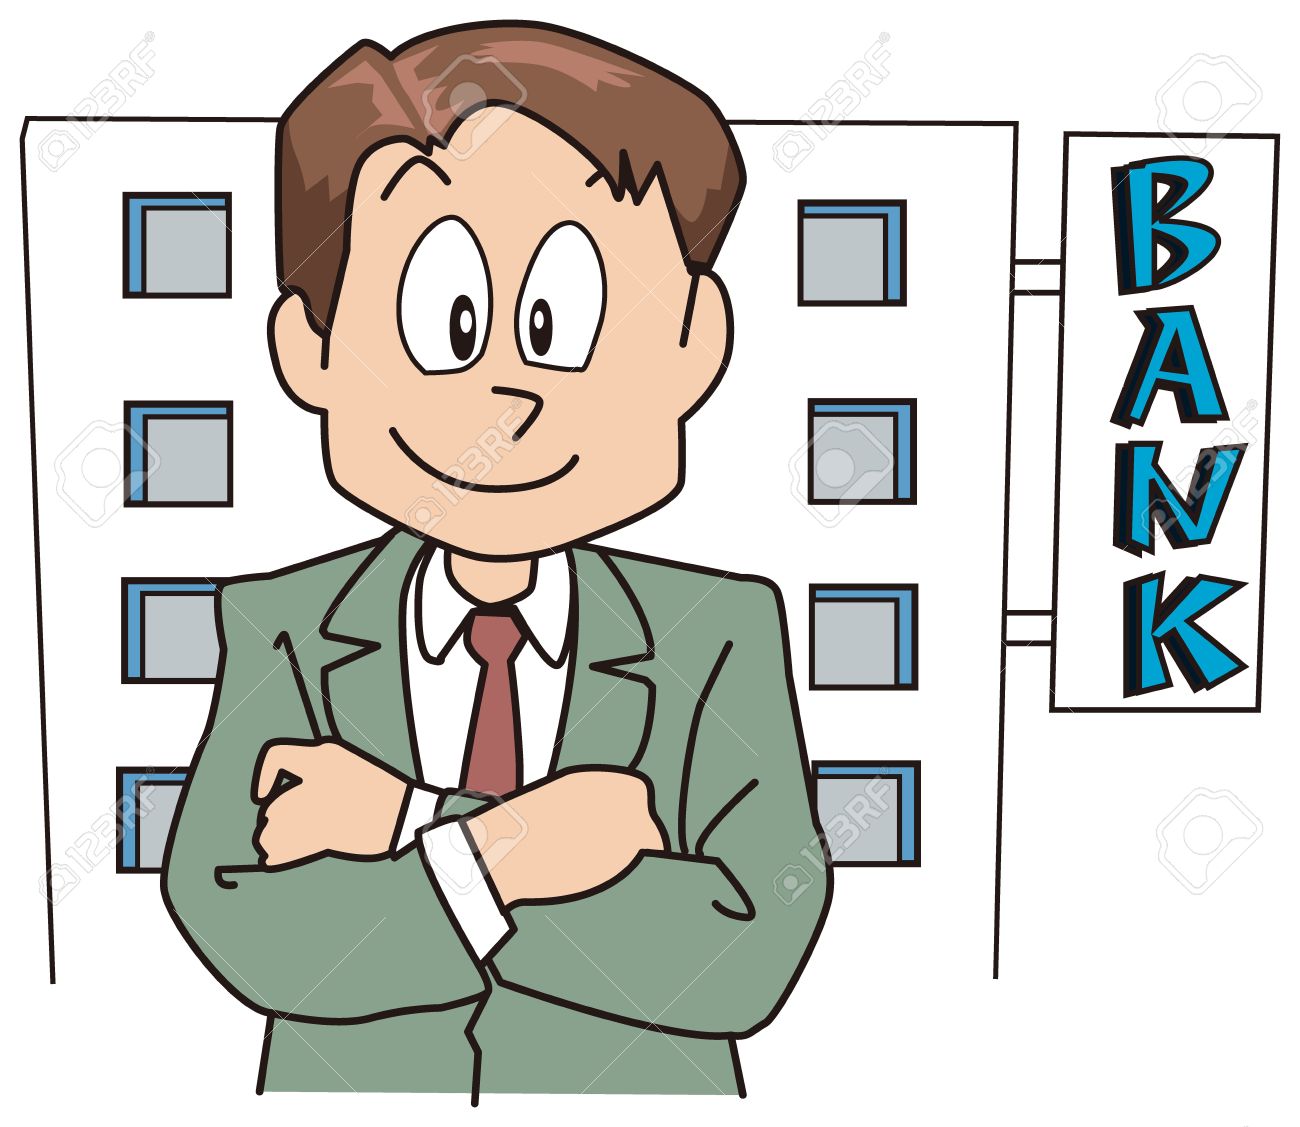 banker clipart - photo #6